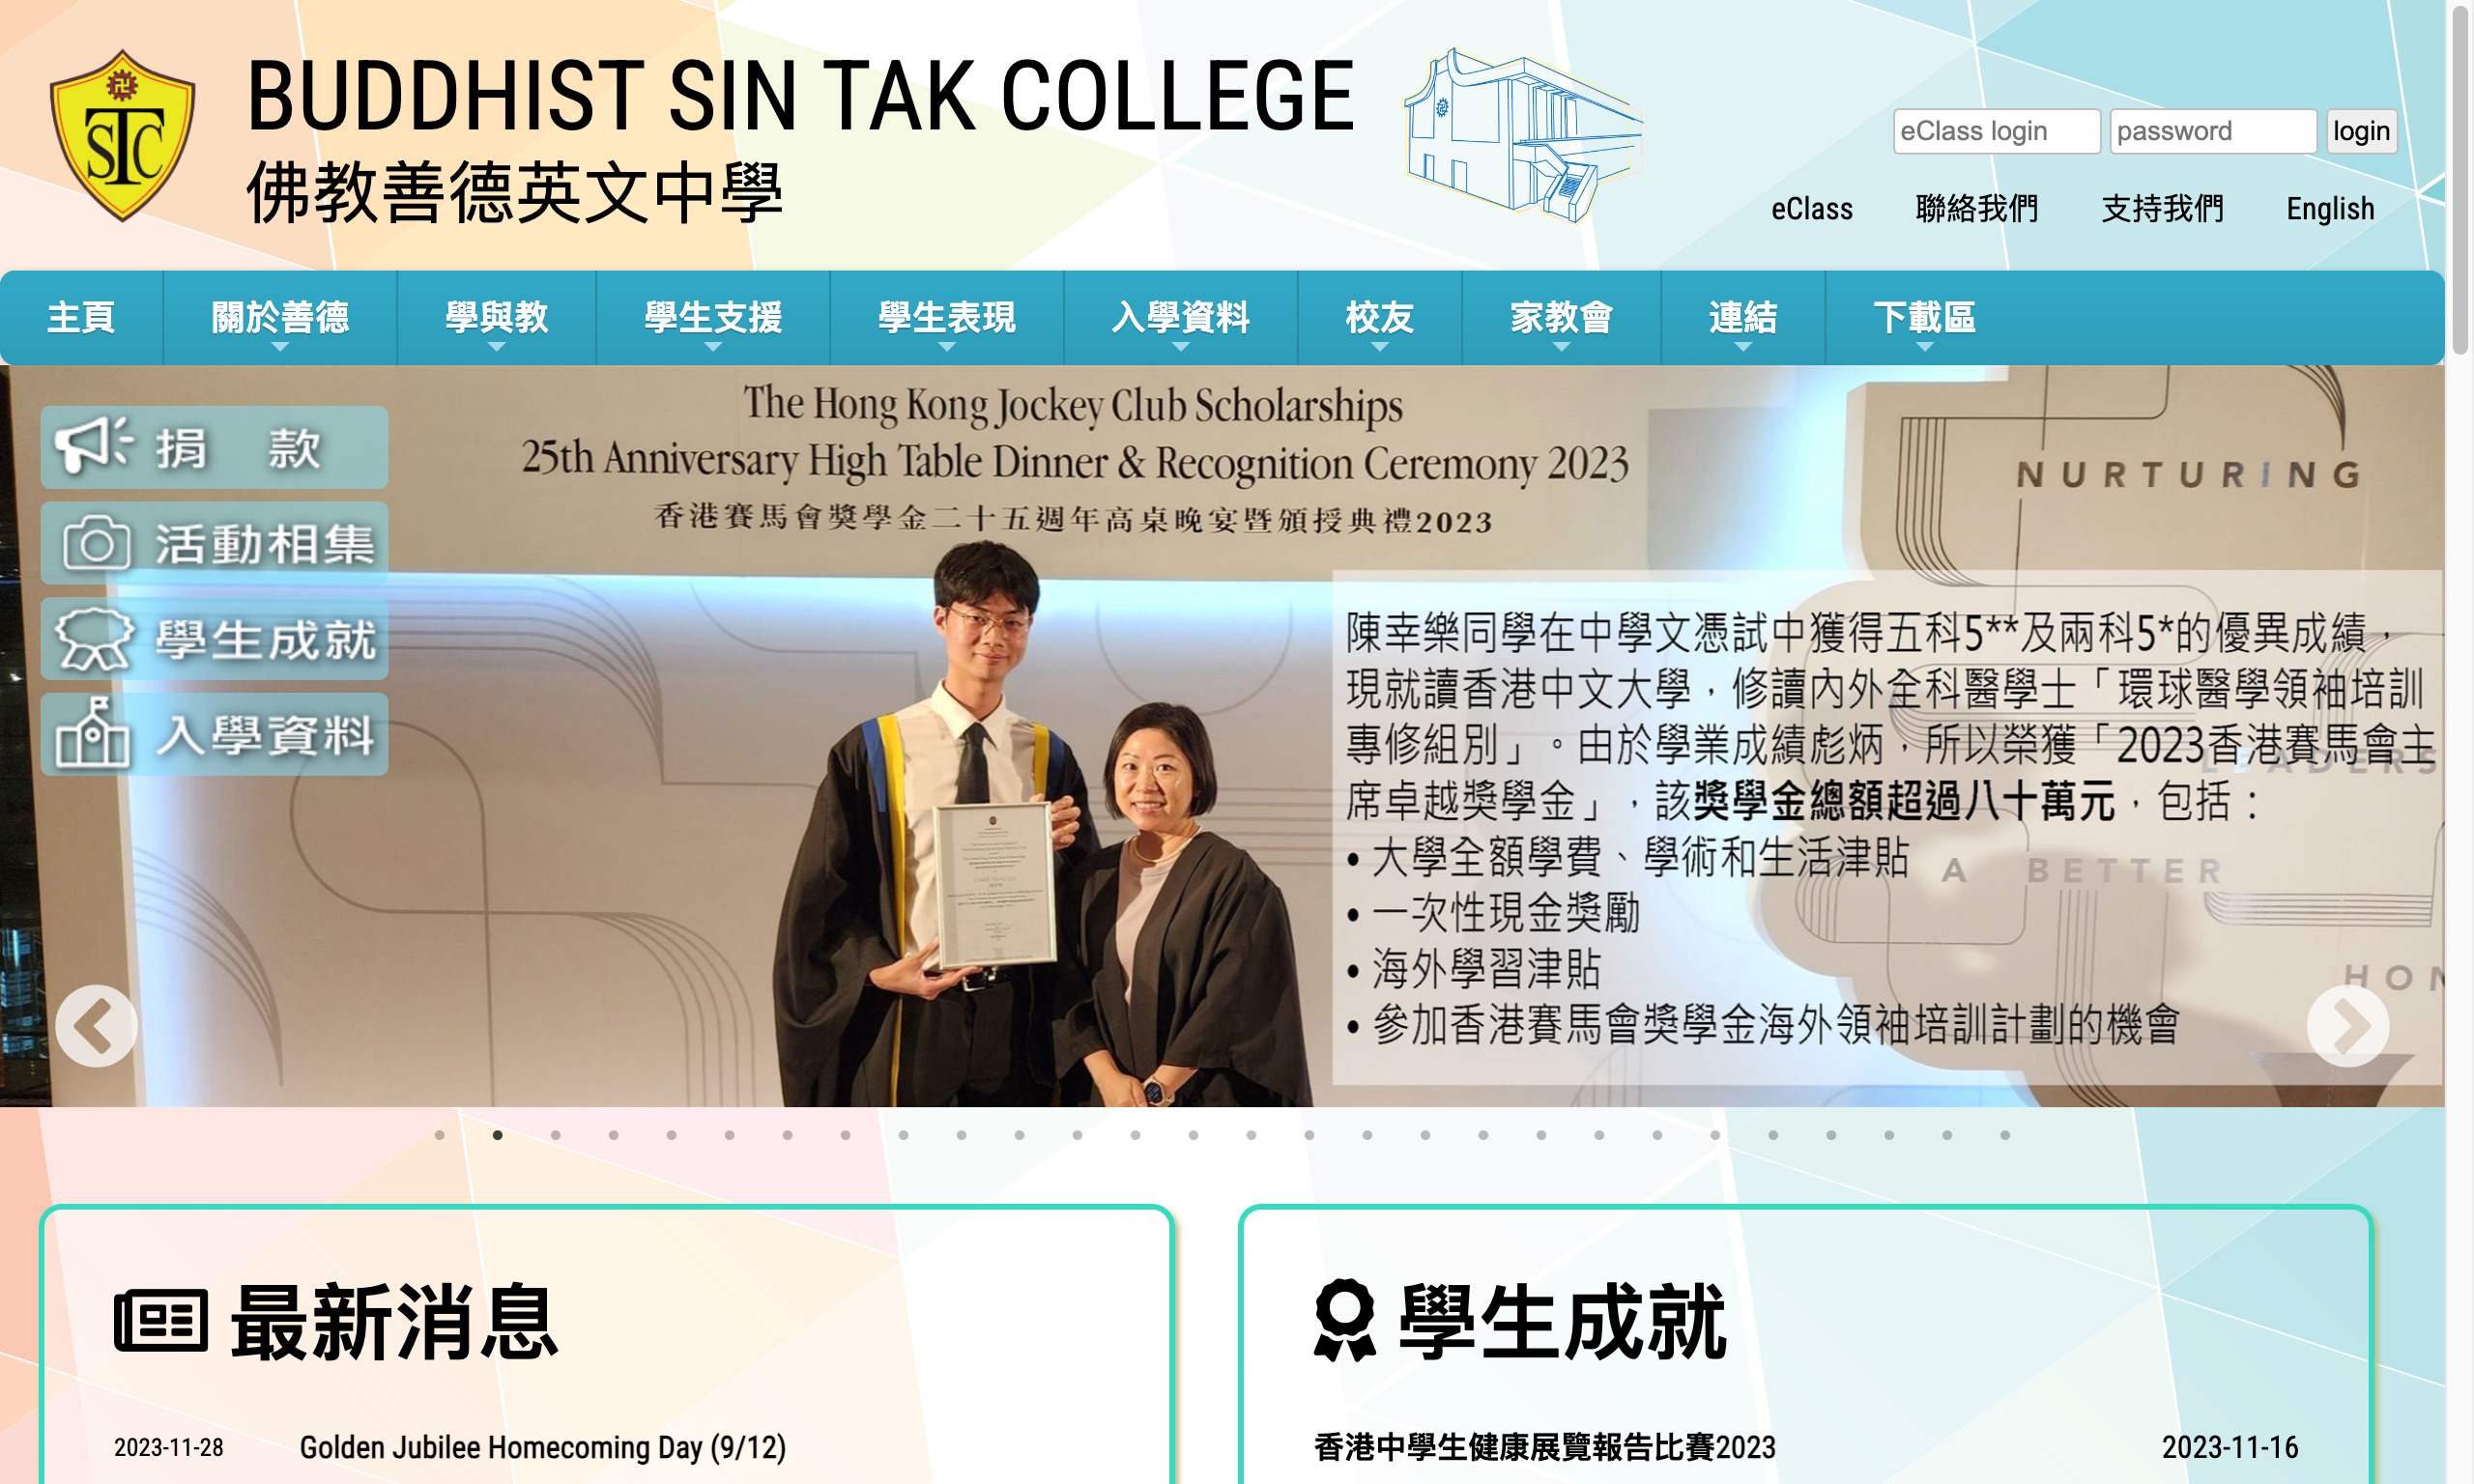 Screenshot of the Home Page of Buddhist Sin Tak College